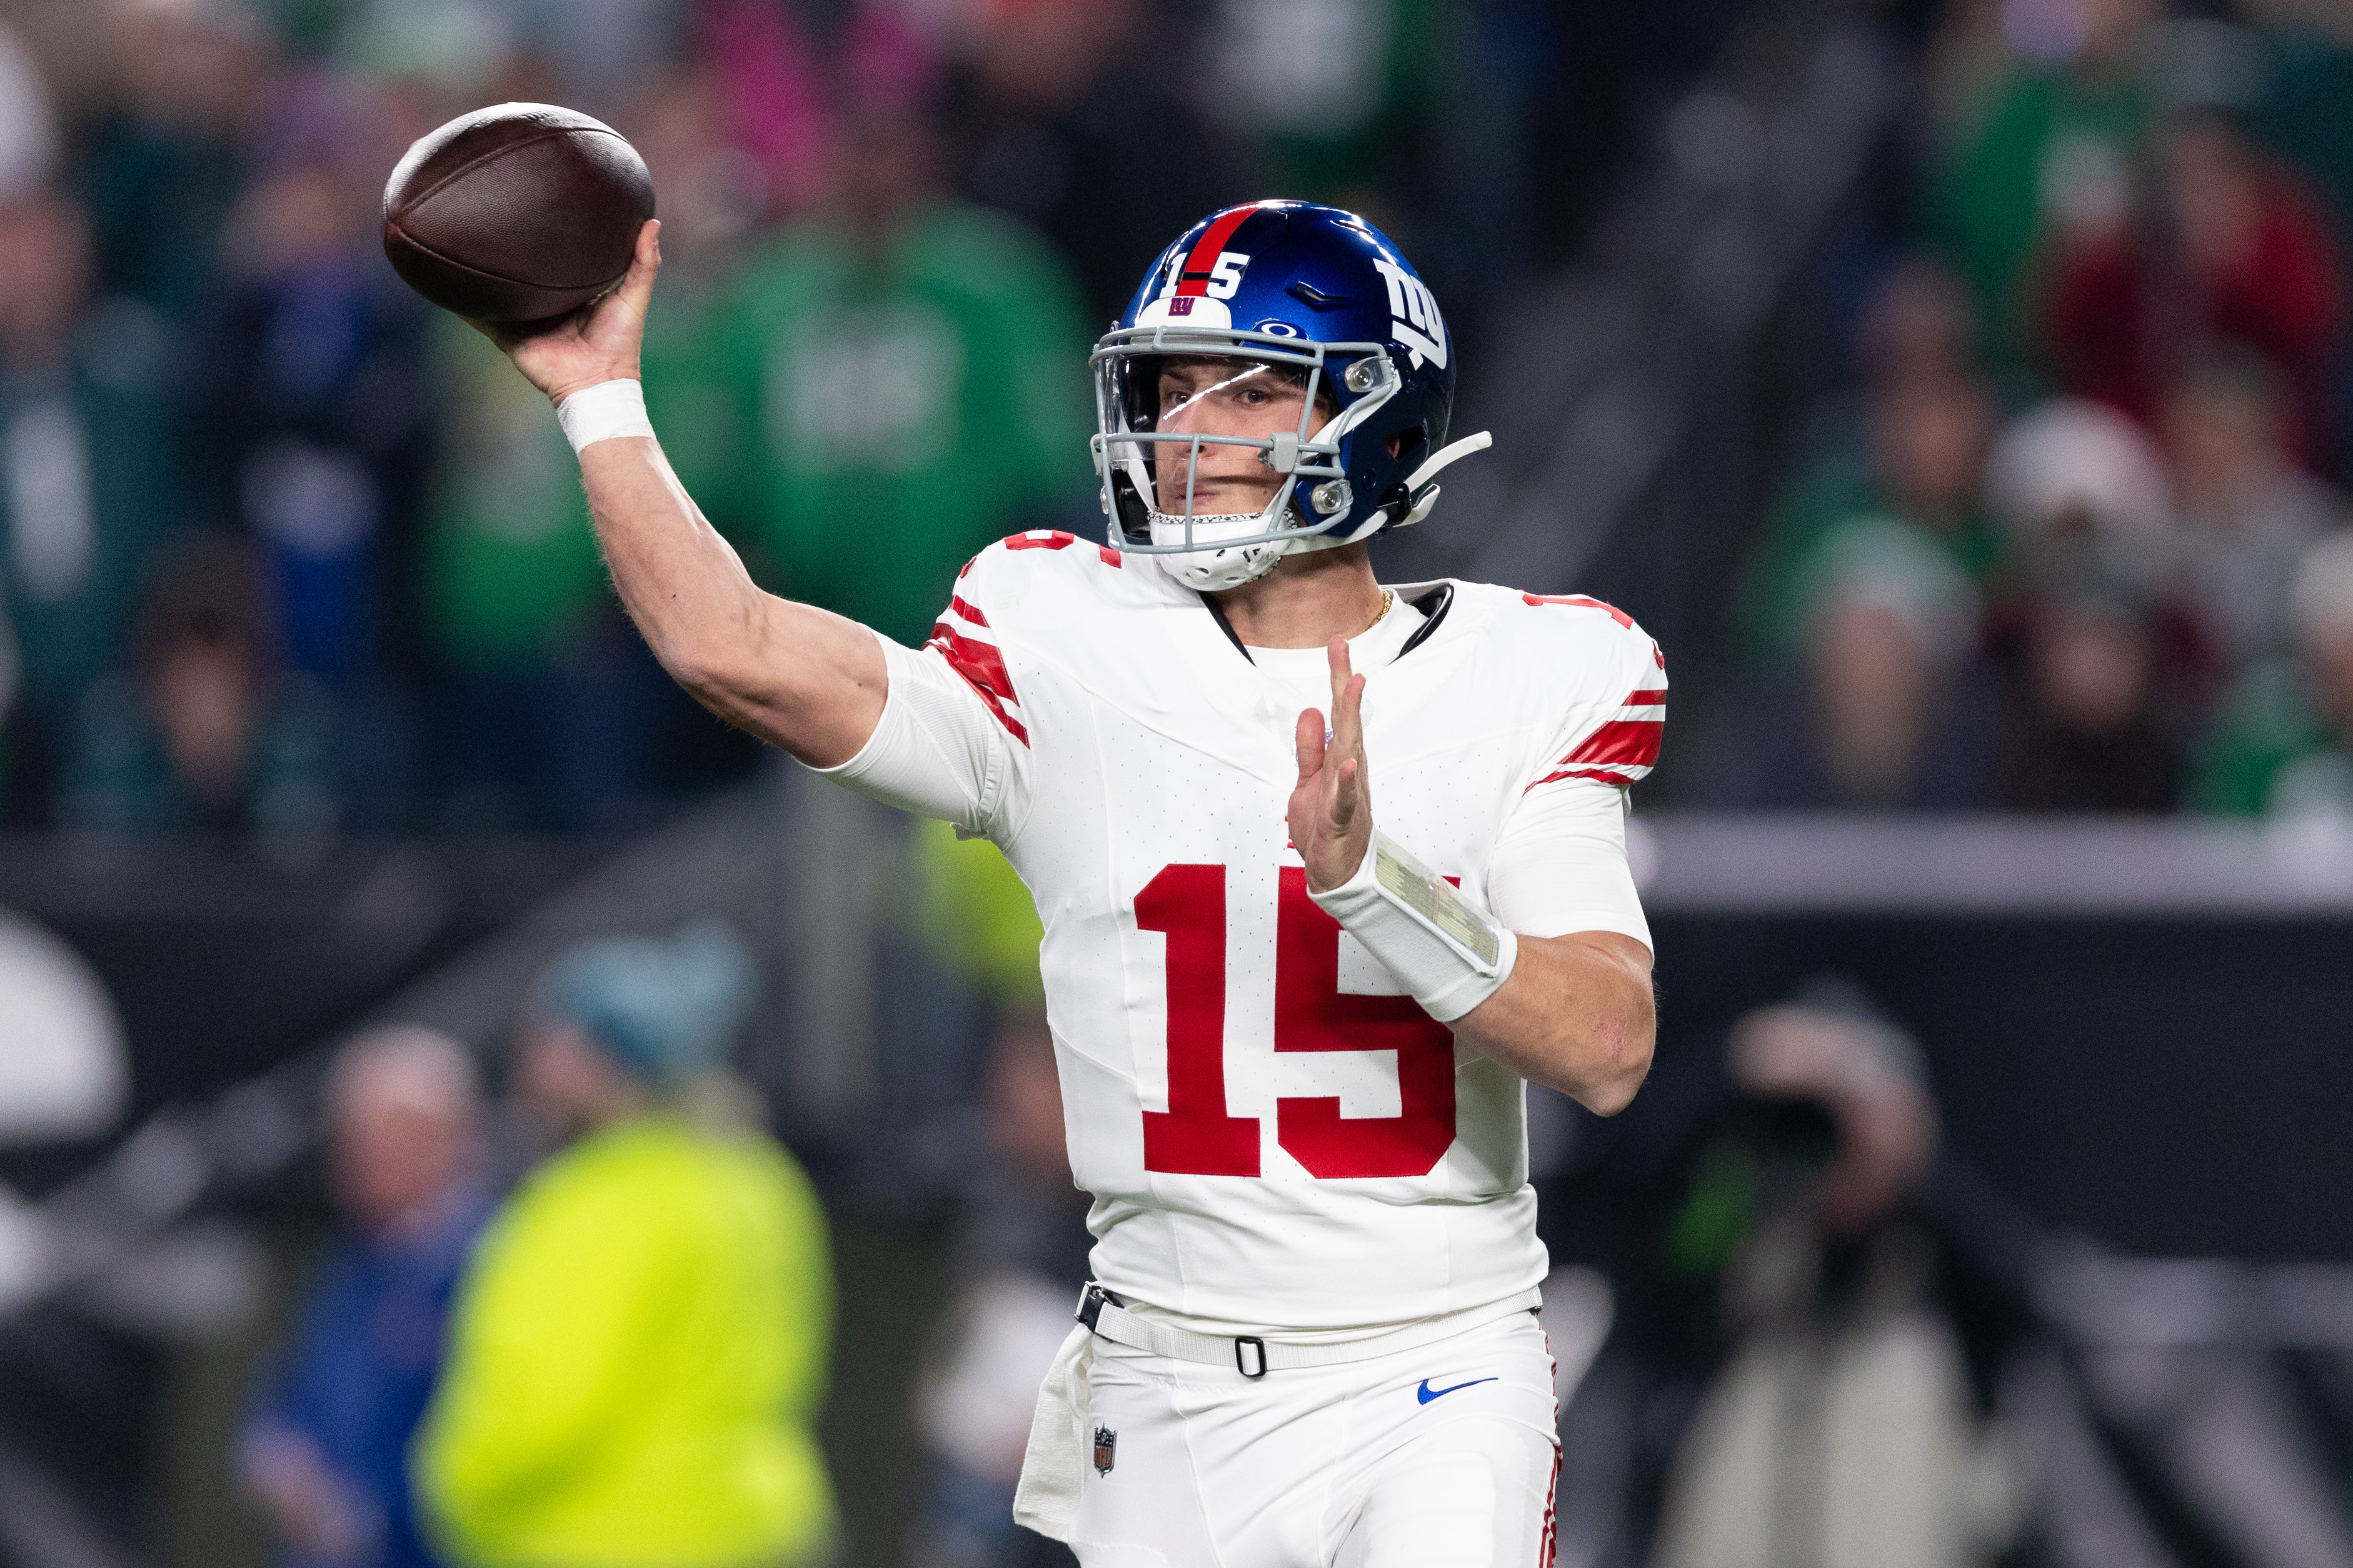 New York Giants quarterback Tommy DeVito (15) passes the ball against the Philadelphia Eagles during the second quarter at Lincoln Financial Field